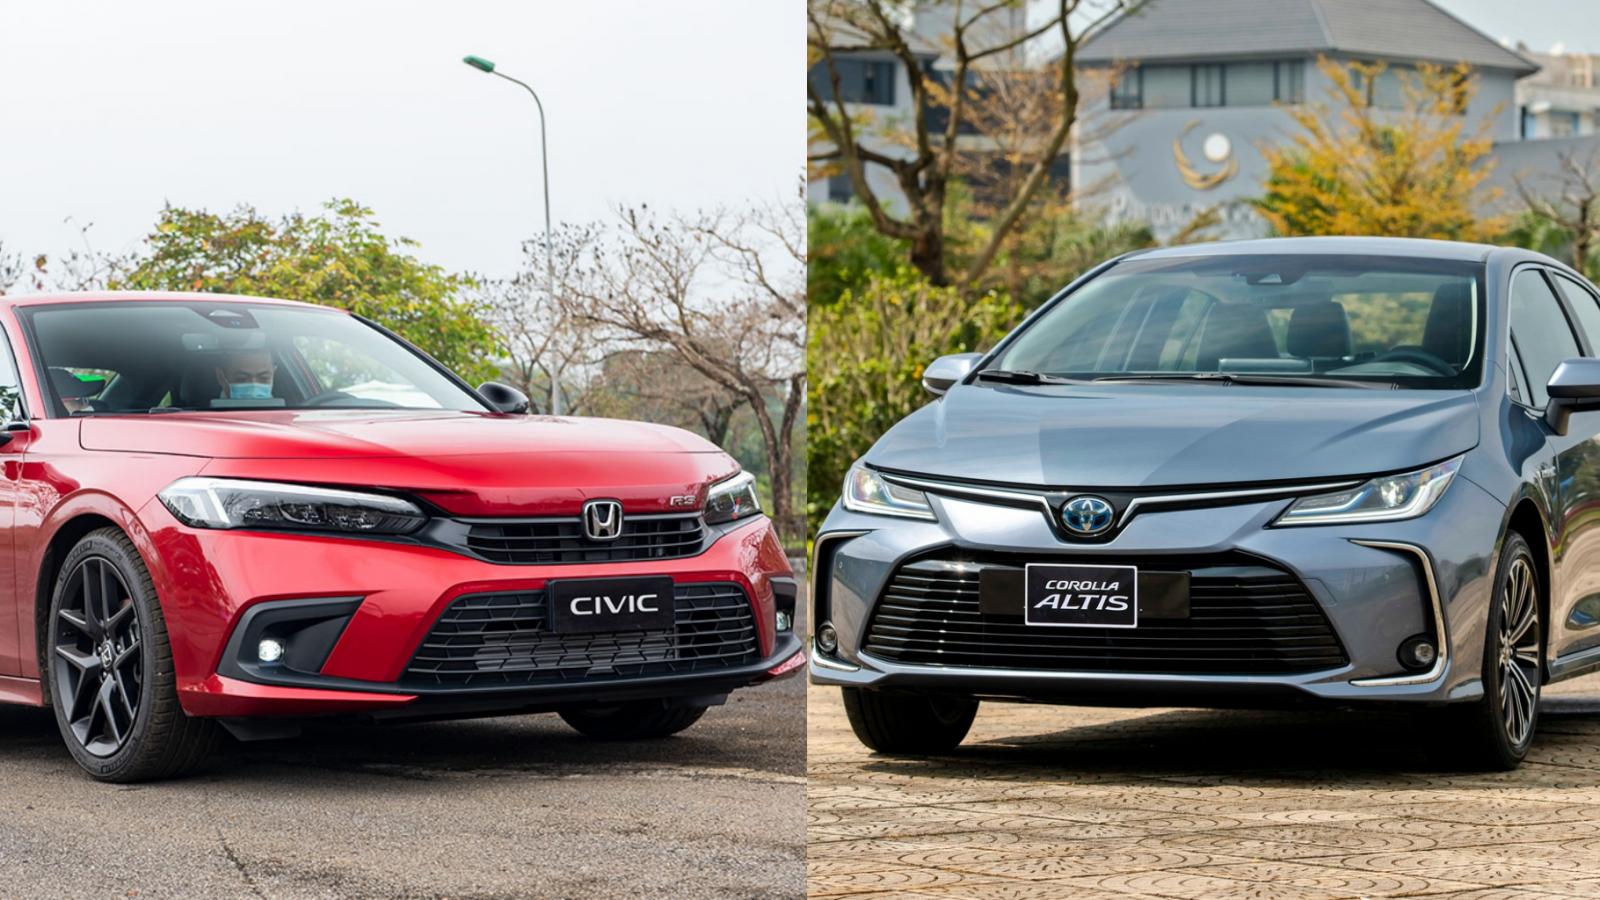 Toyota Corolla Altis Vs Honda Civic Which One Is Better?